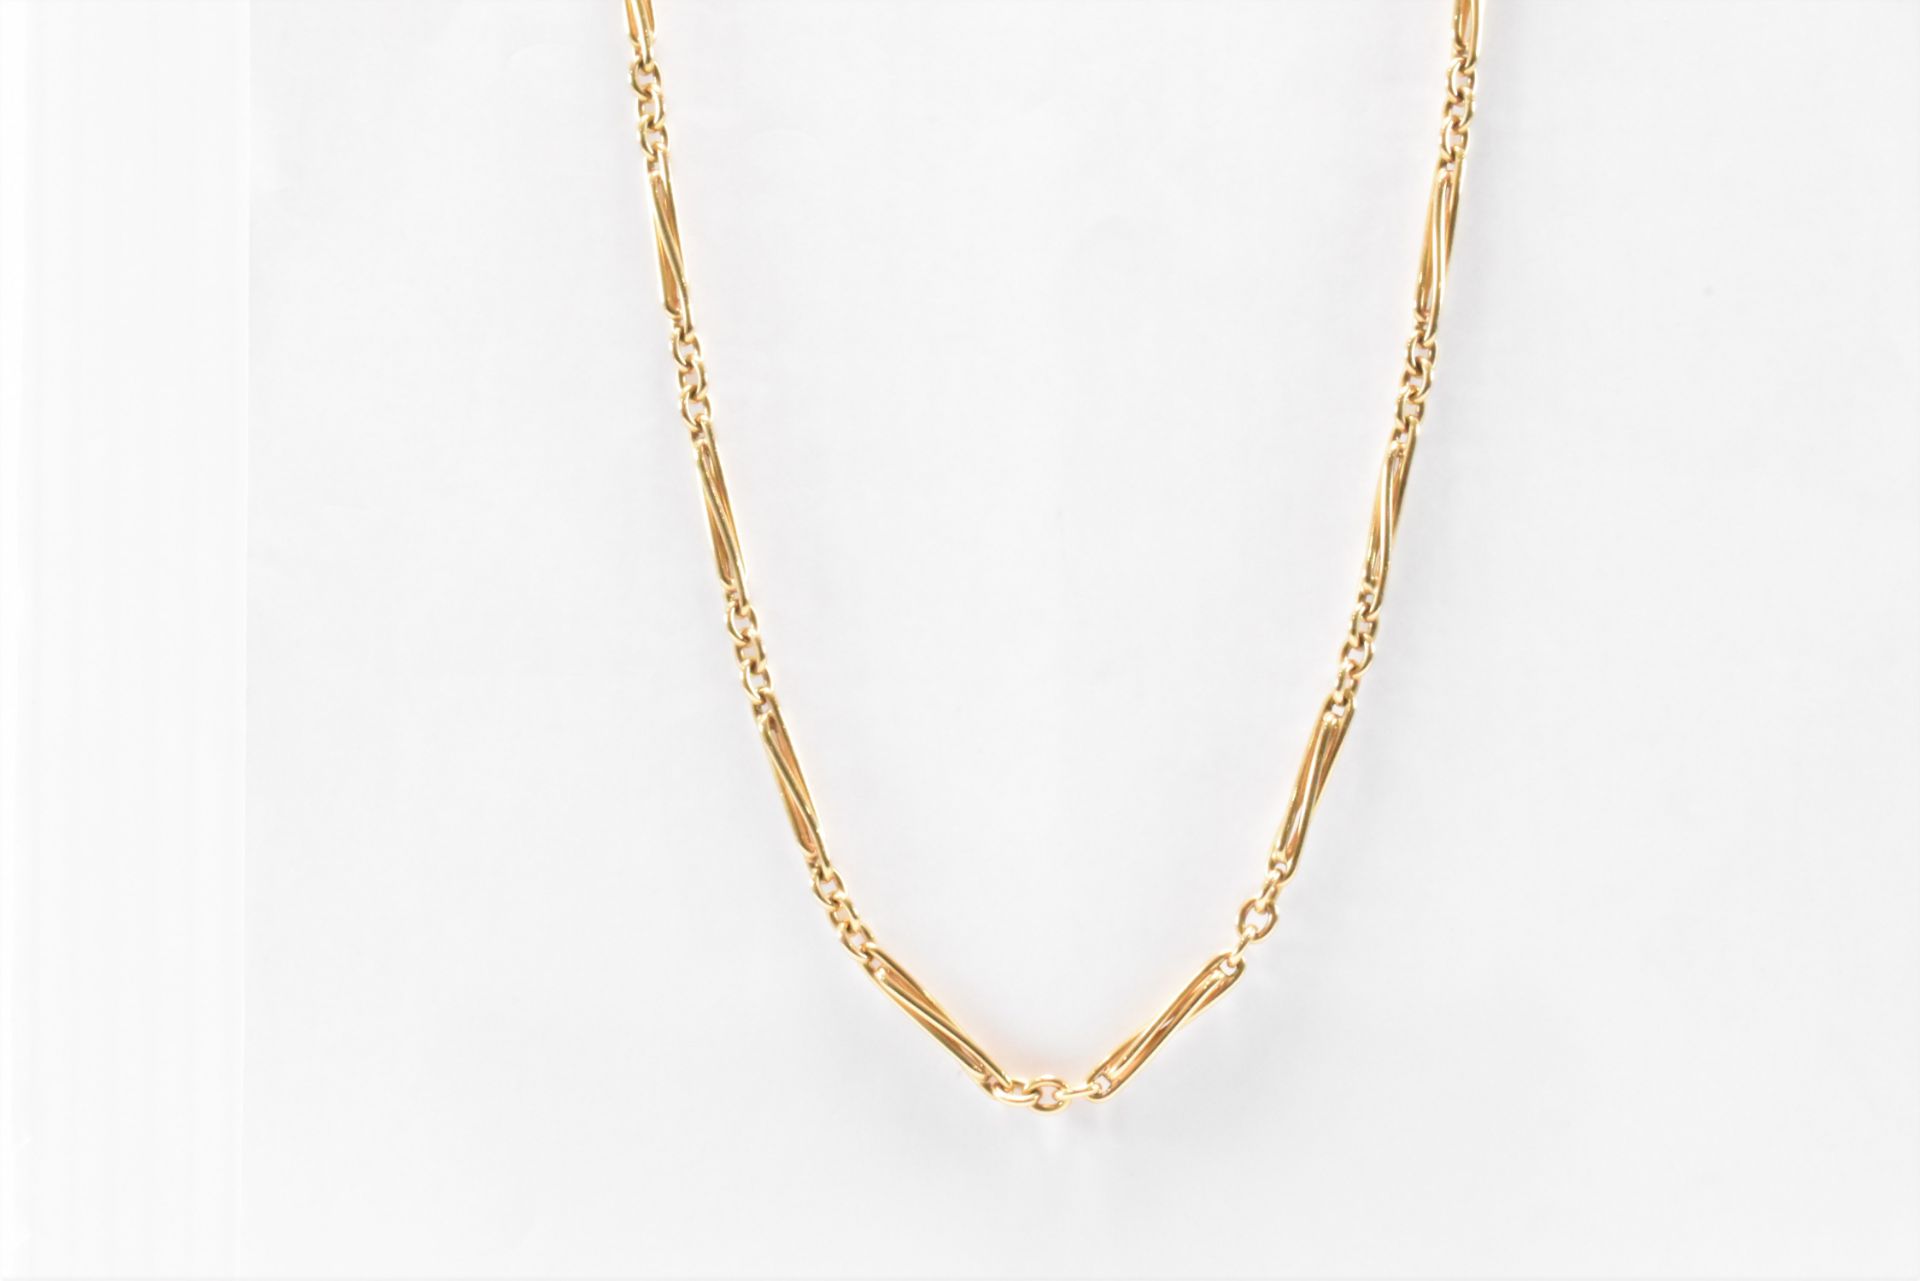 HALLMARKED 9CT GOLD FANCY LINK NECKLACE CHAIN - Image 2 of 4